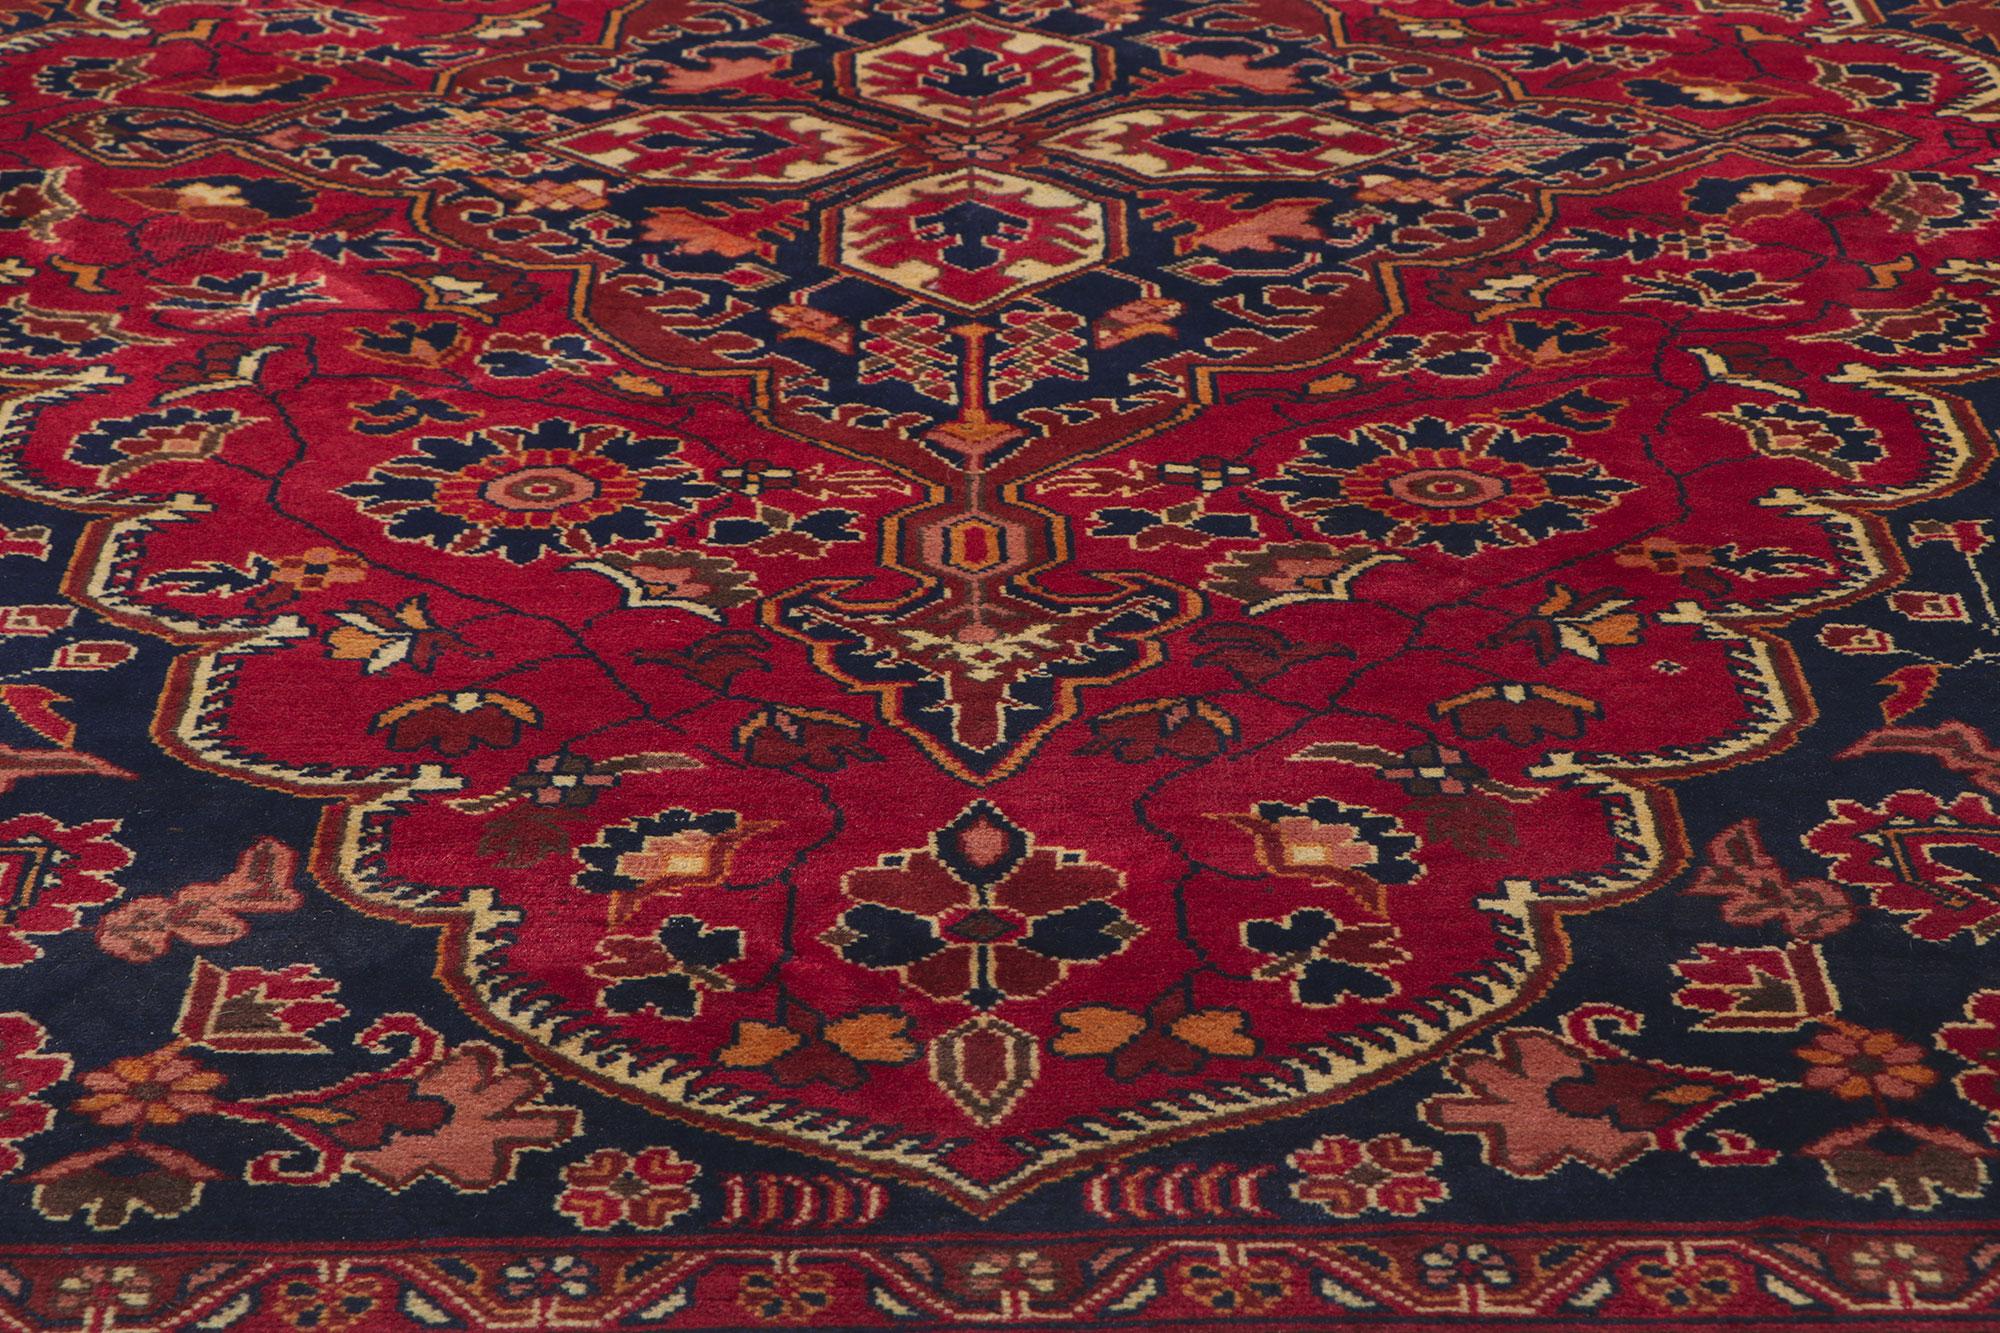 Vintage Afghani Rug, Timeless Appeal Meets Stylish Durability In Good Condition For Sale In Dallas, TX